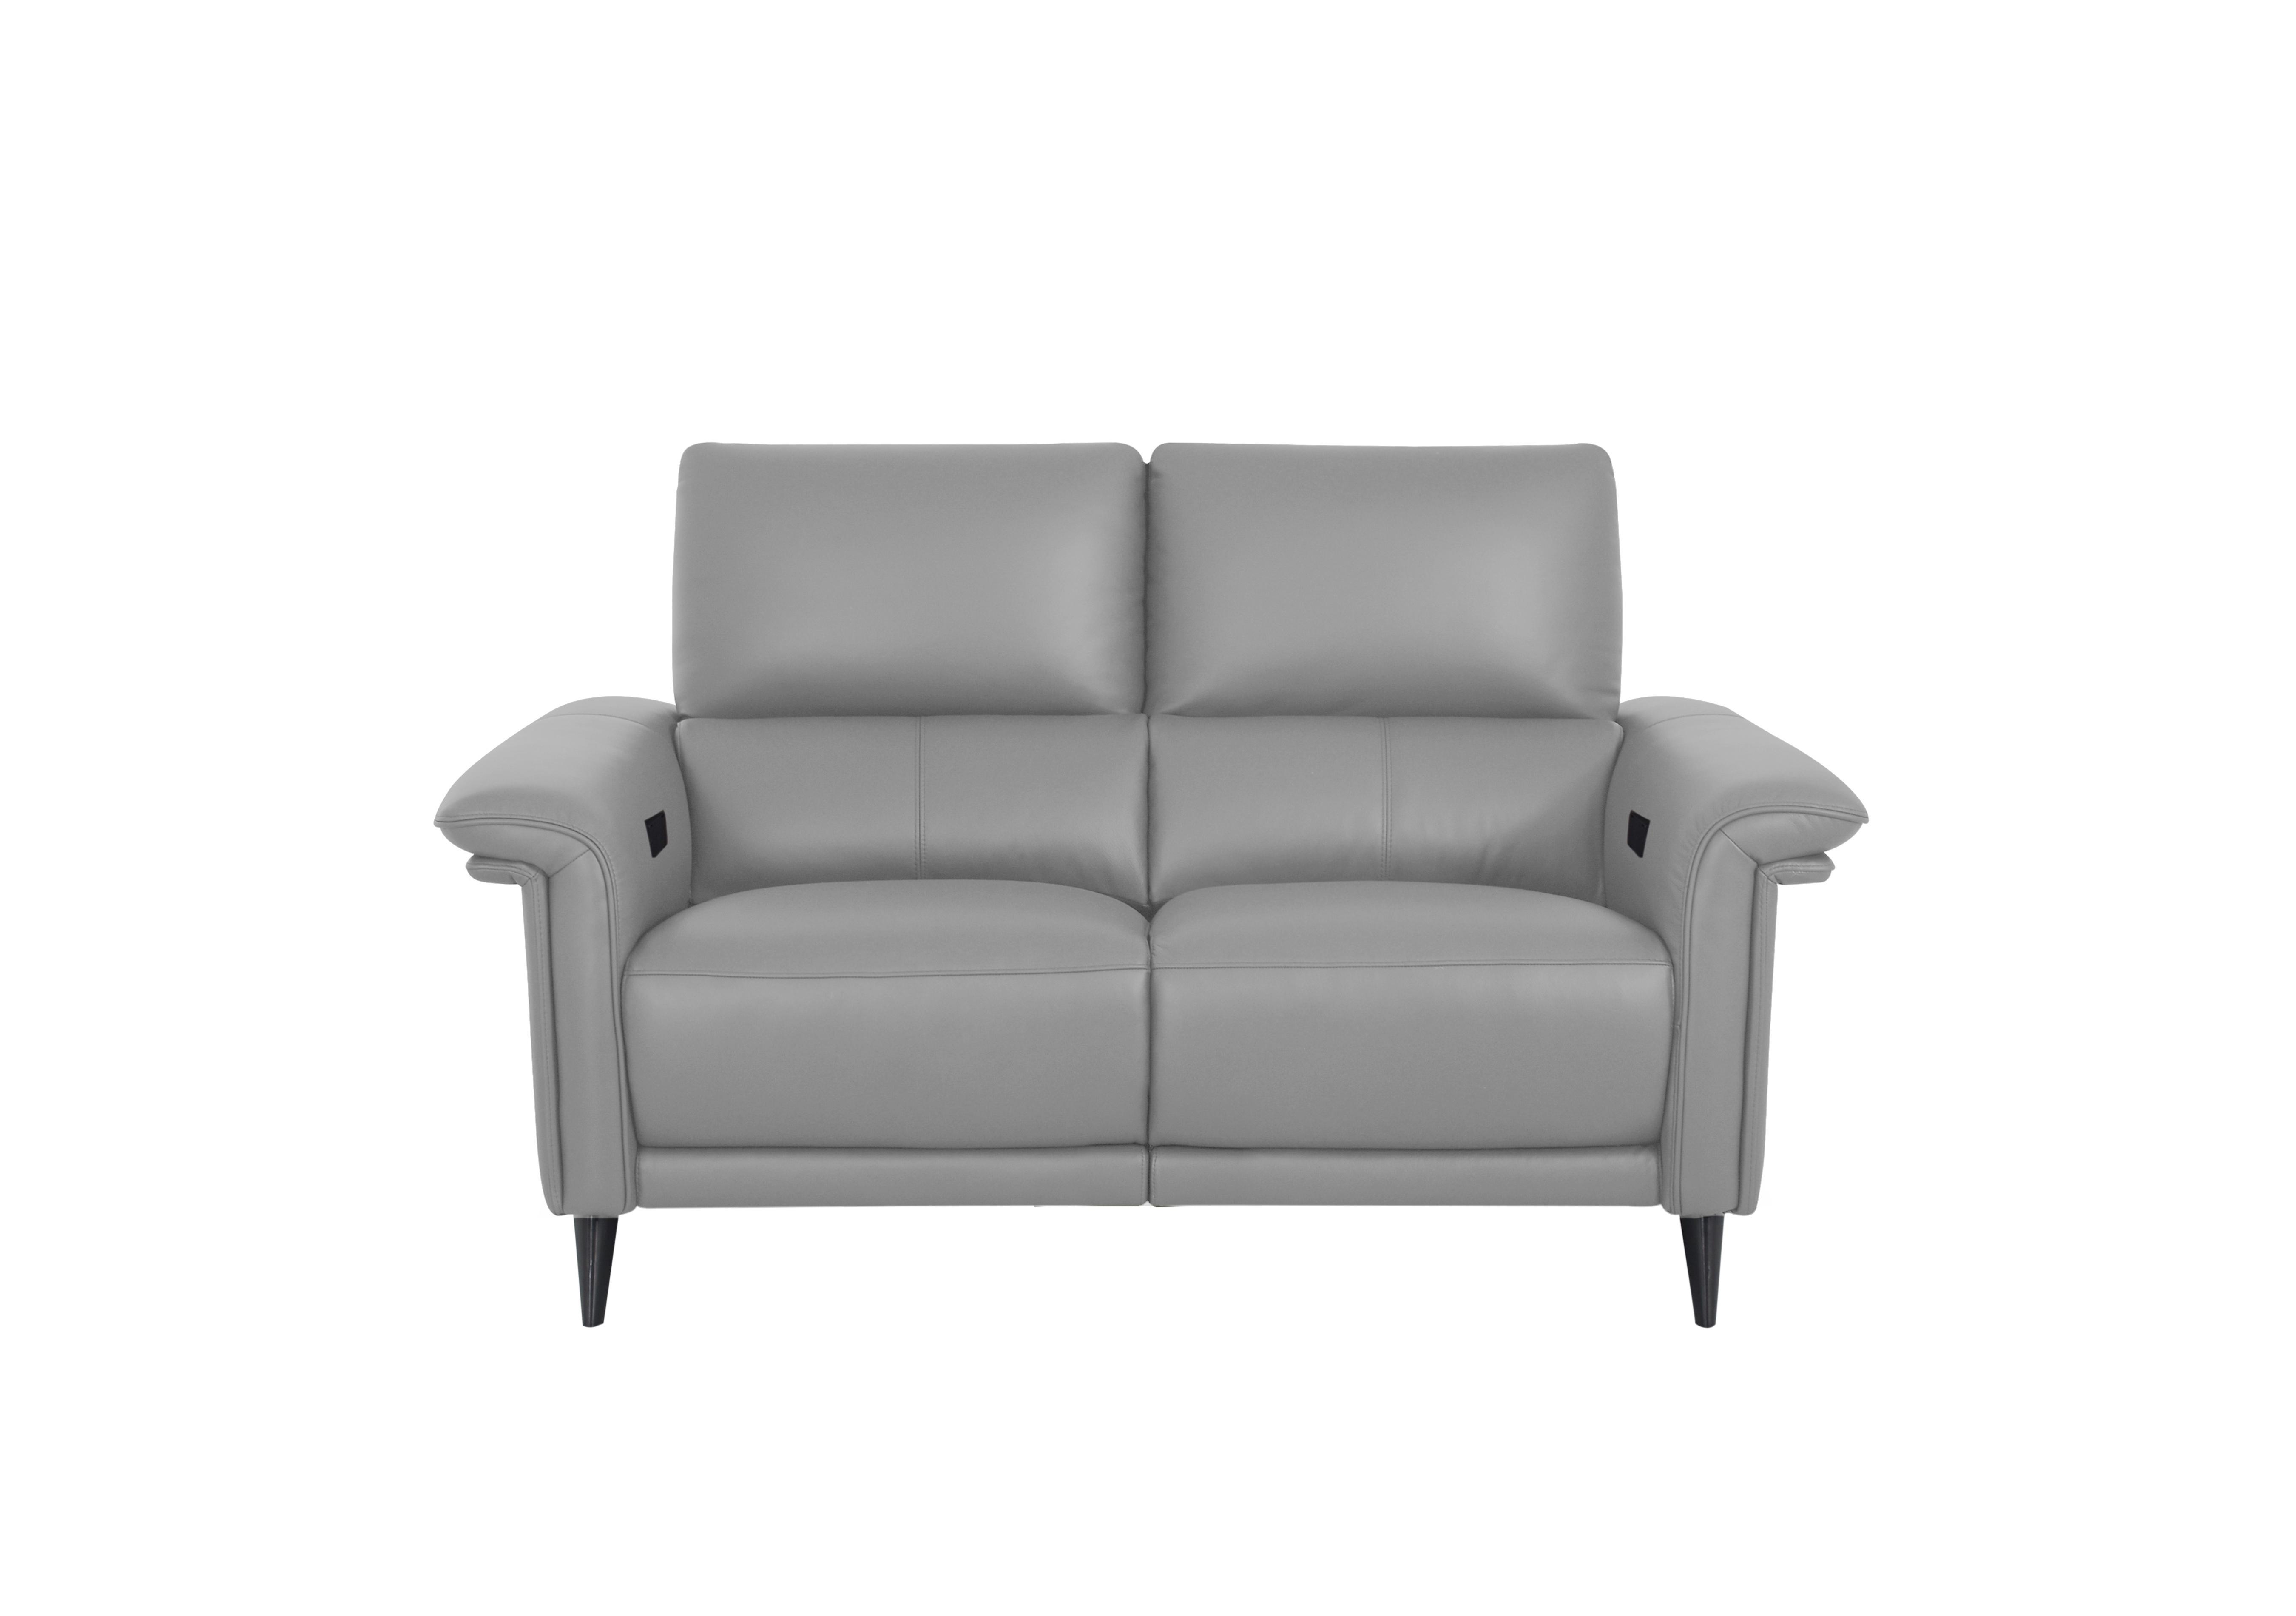 Huxley 2 Seater Leather Sofa in Nn-516e Light Grey on Furniture Village